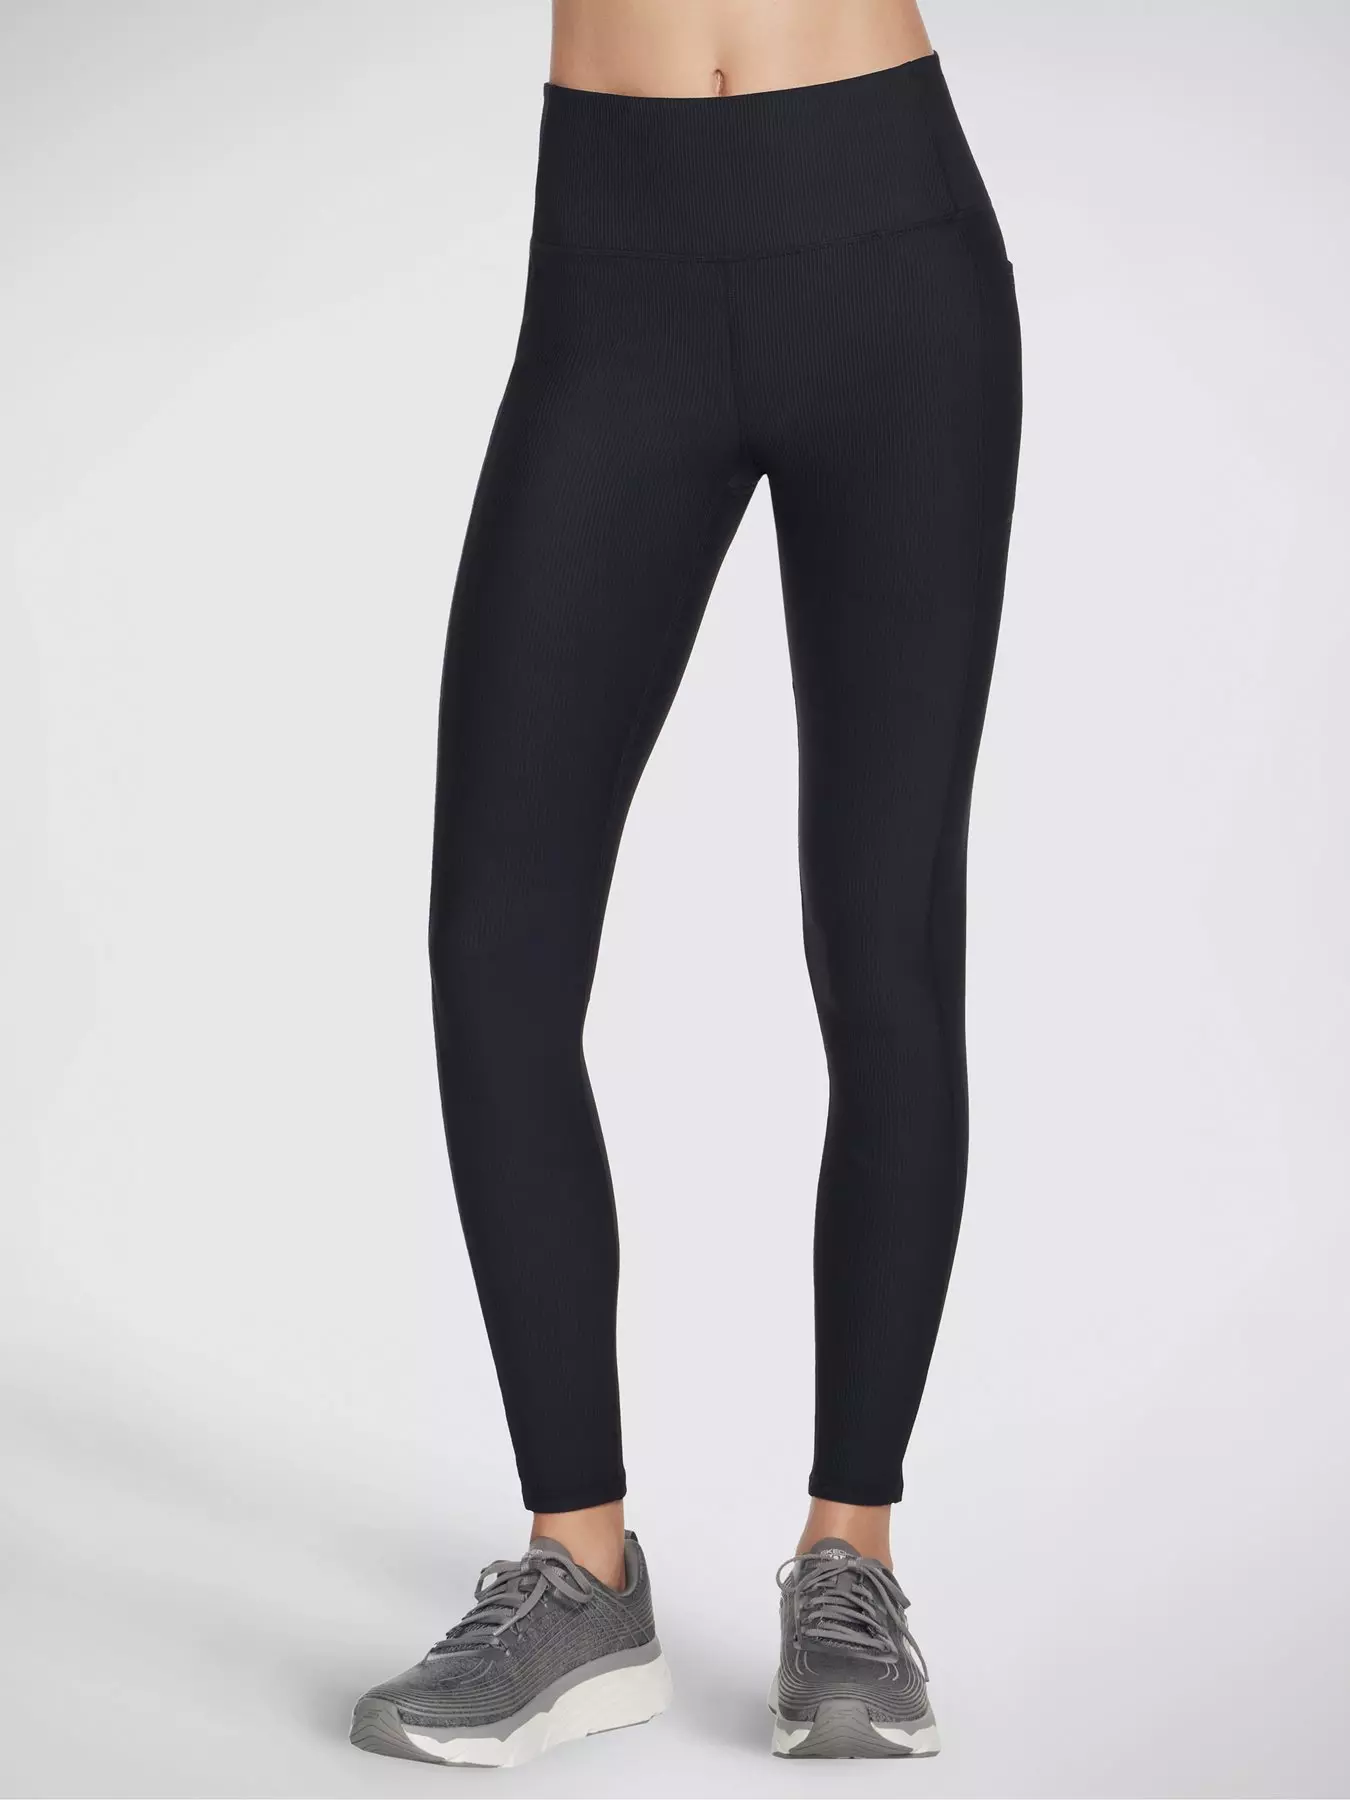 Black Gym Leggings - High Waisted Sculpting and Mesh Panel - size Small uk  8-10